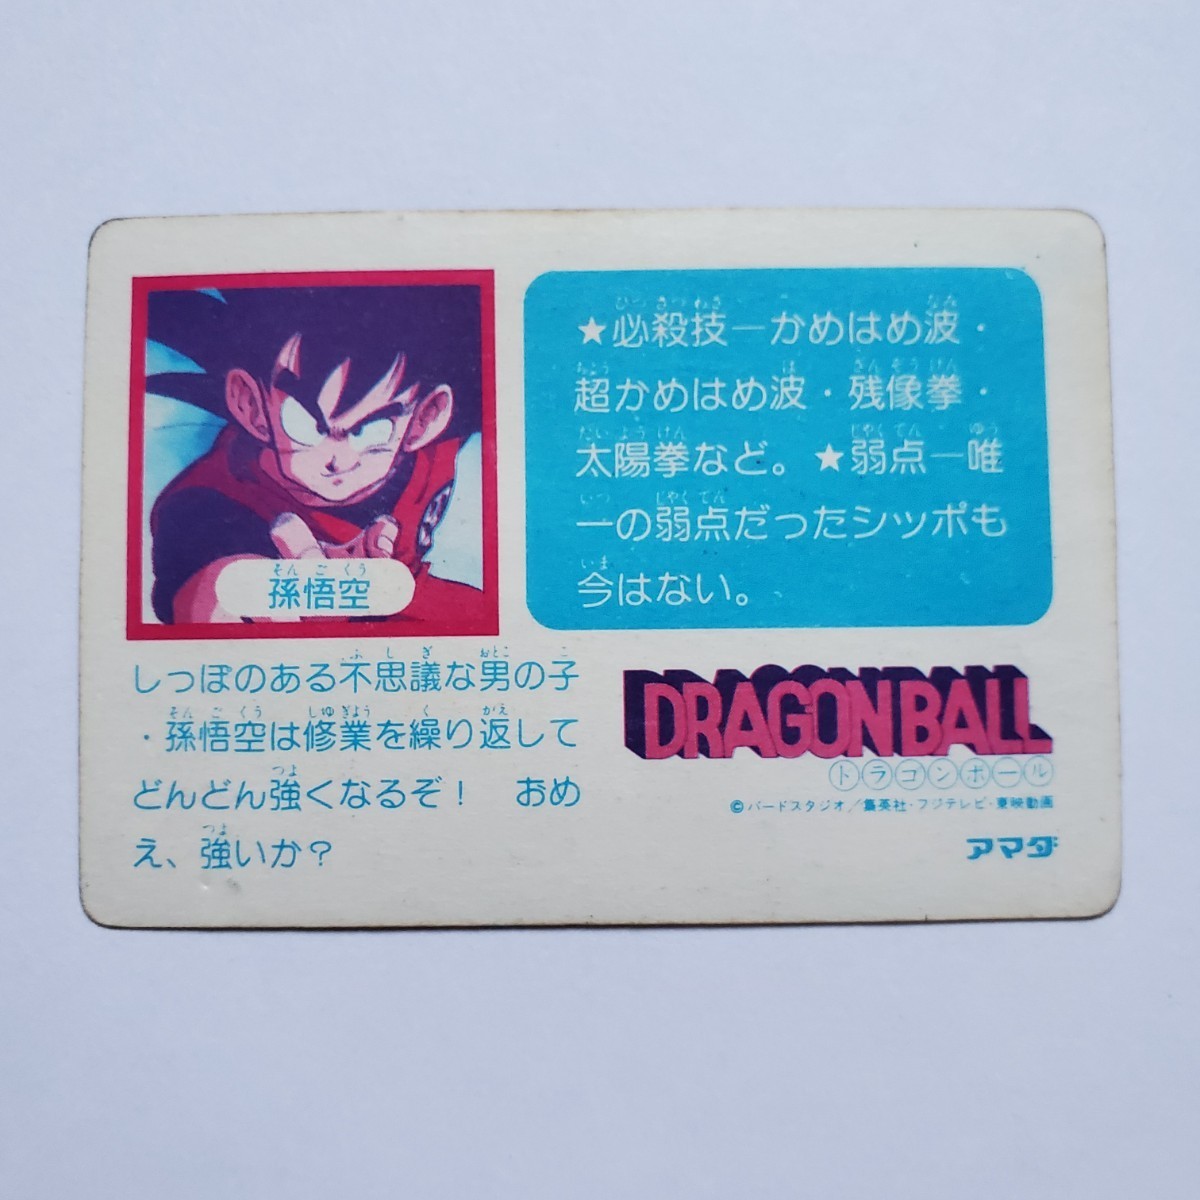 [ image present condition goods * commodity explanation obligatory reading ] Dragon Ball PP card 0.No.1 Monkey King p rhythm ink. peeling, coating. blur etc. . is seen.